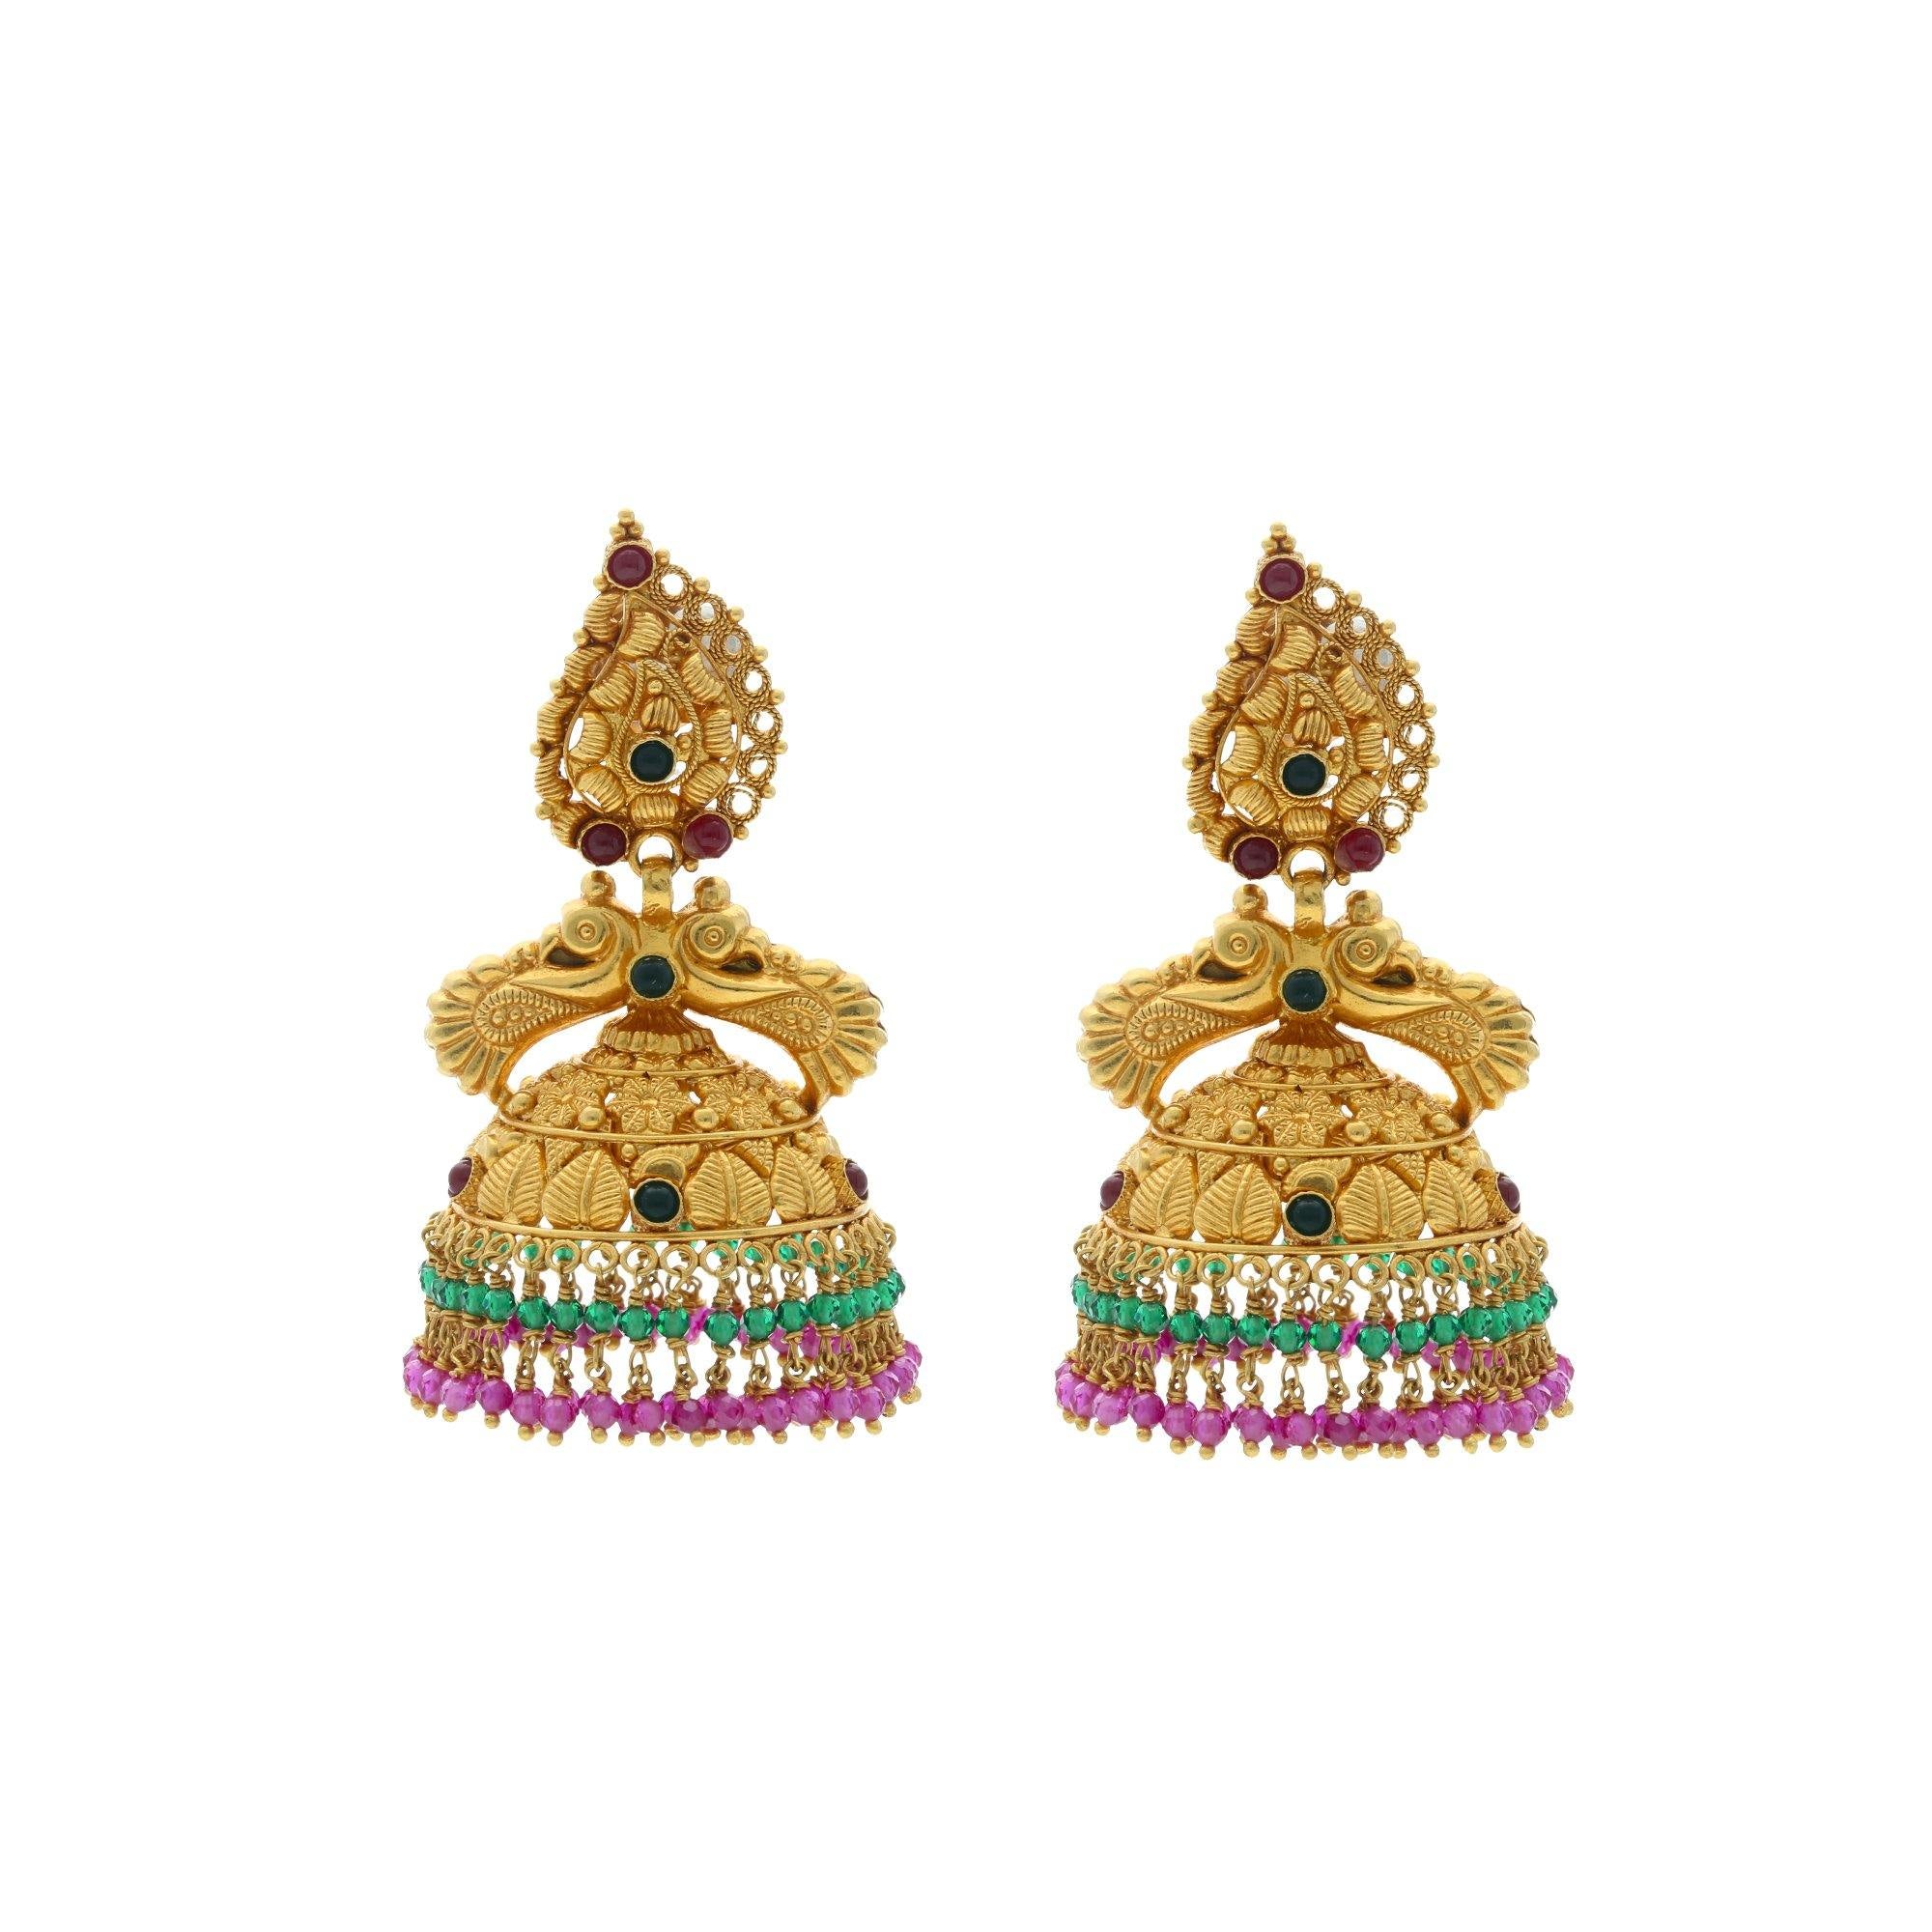 New 2 Gram Gold Earring – African Fashion